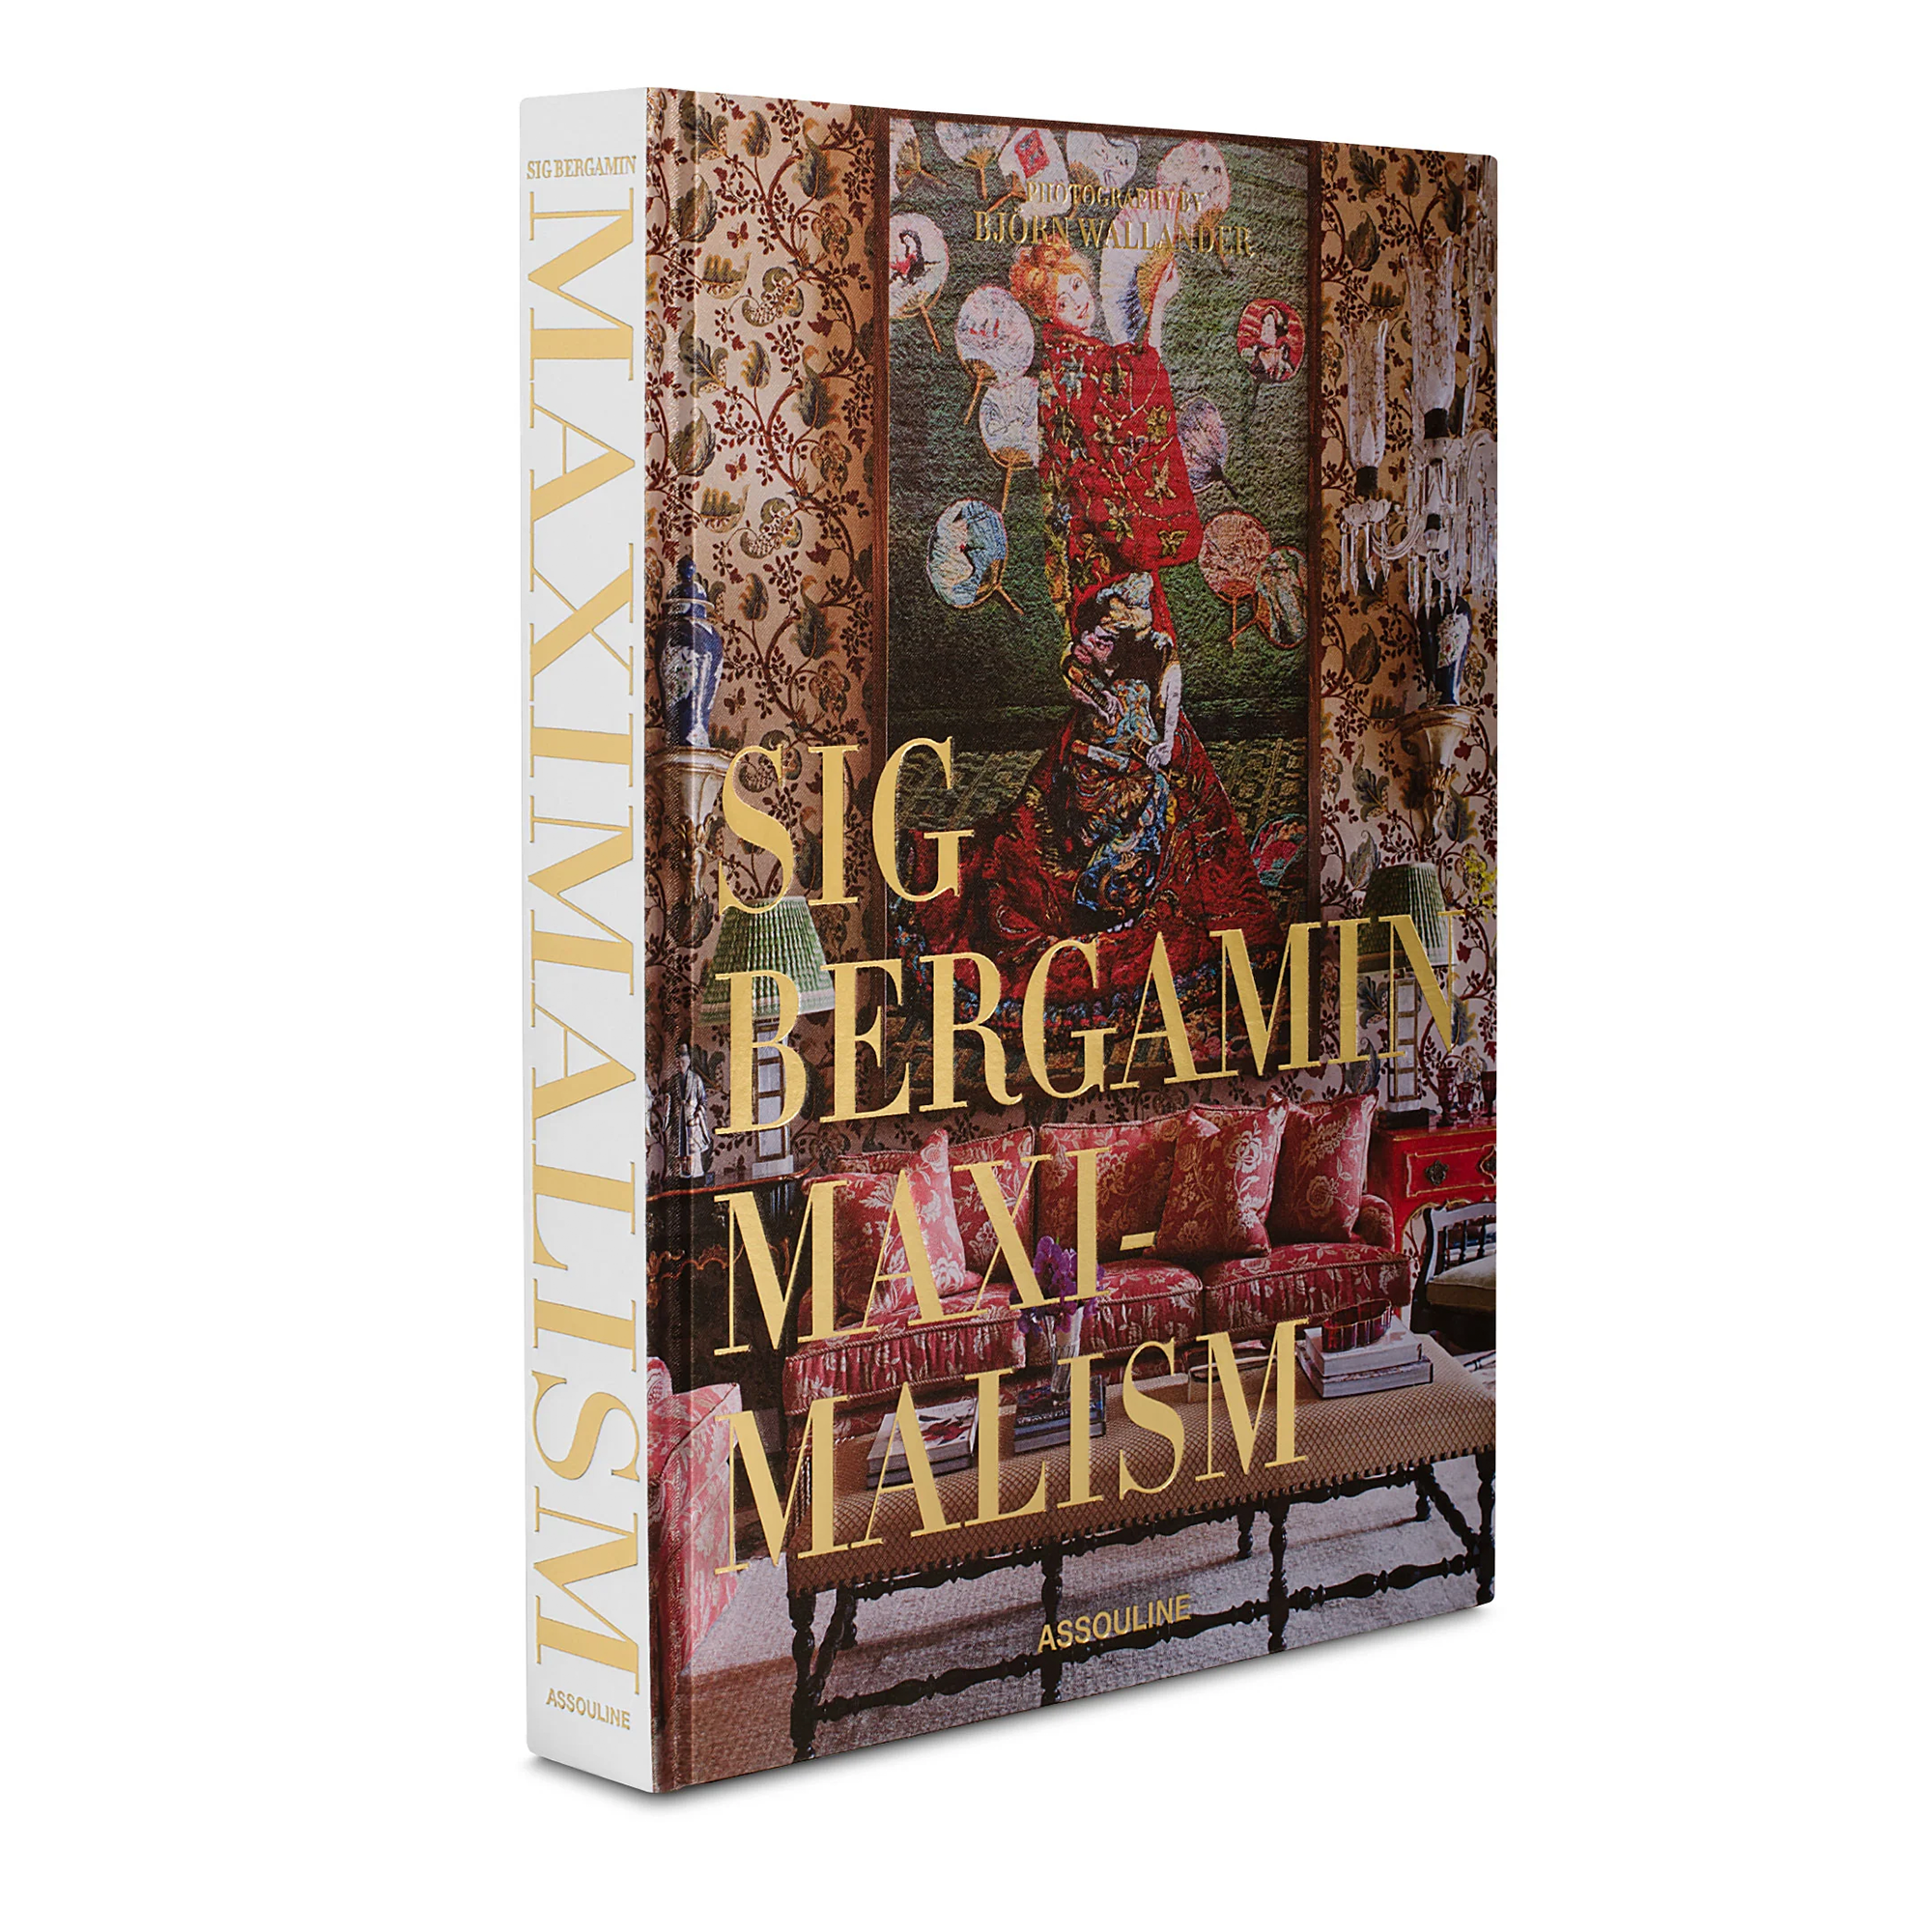 Architect and designer Sig Bergamin is renowned for his vibrant Brazilian style, blending antique and modern furnishings. A self-described “maximalist,” he travels the world collecting unique treasures. His designs, featured in a book with a warm-hued cover, showcase his attention to detail and create distinctive spaces.